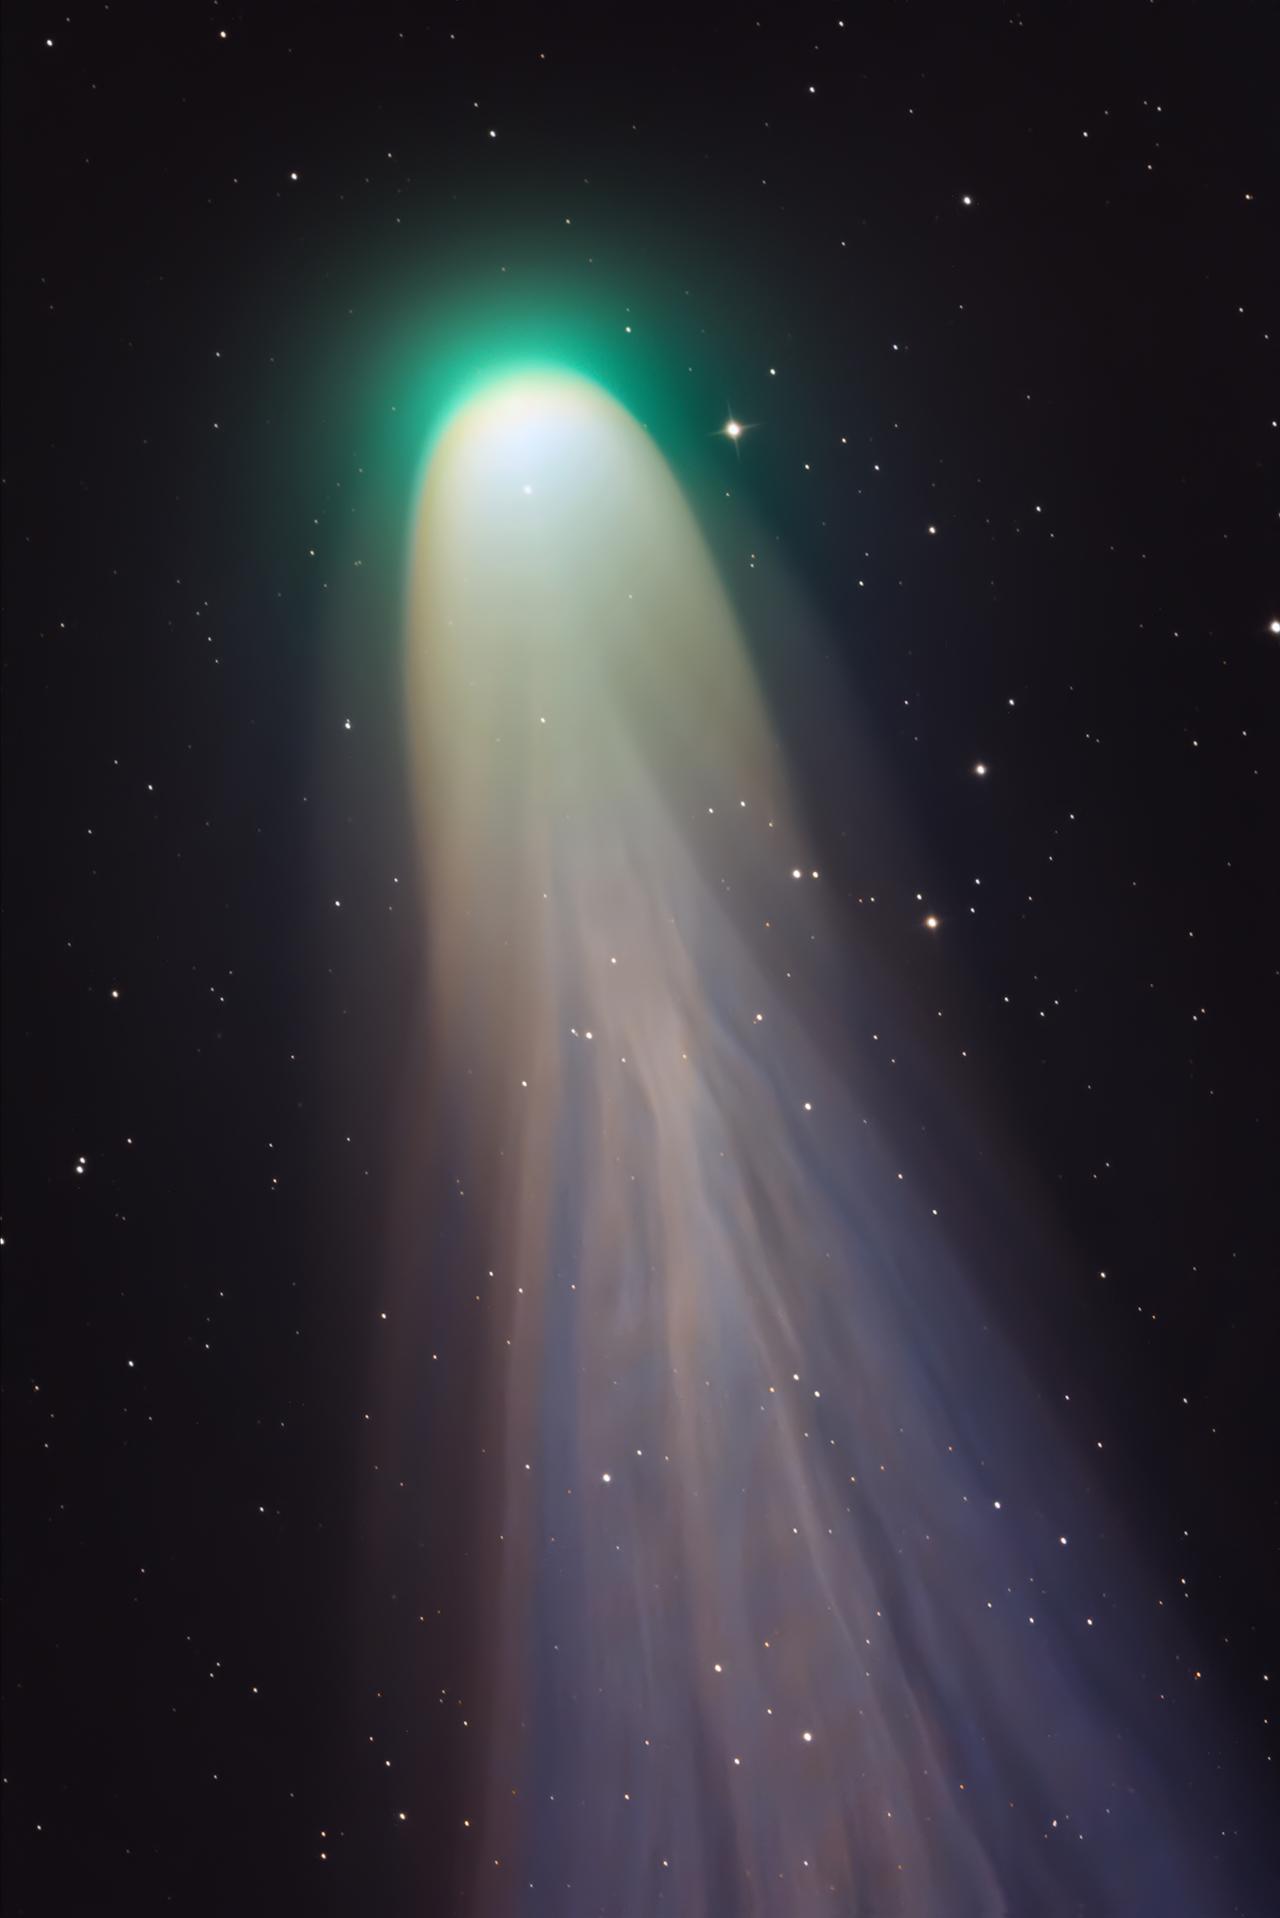 An image showing 'Comet Leonard by Matt Dieterich - Astronomy Photographer of the Year 2022'